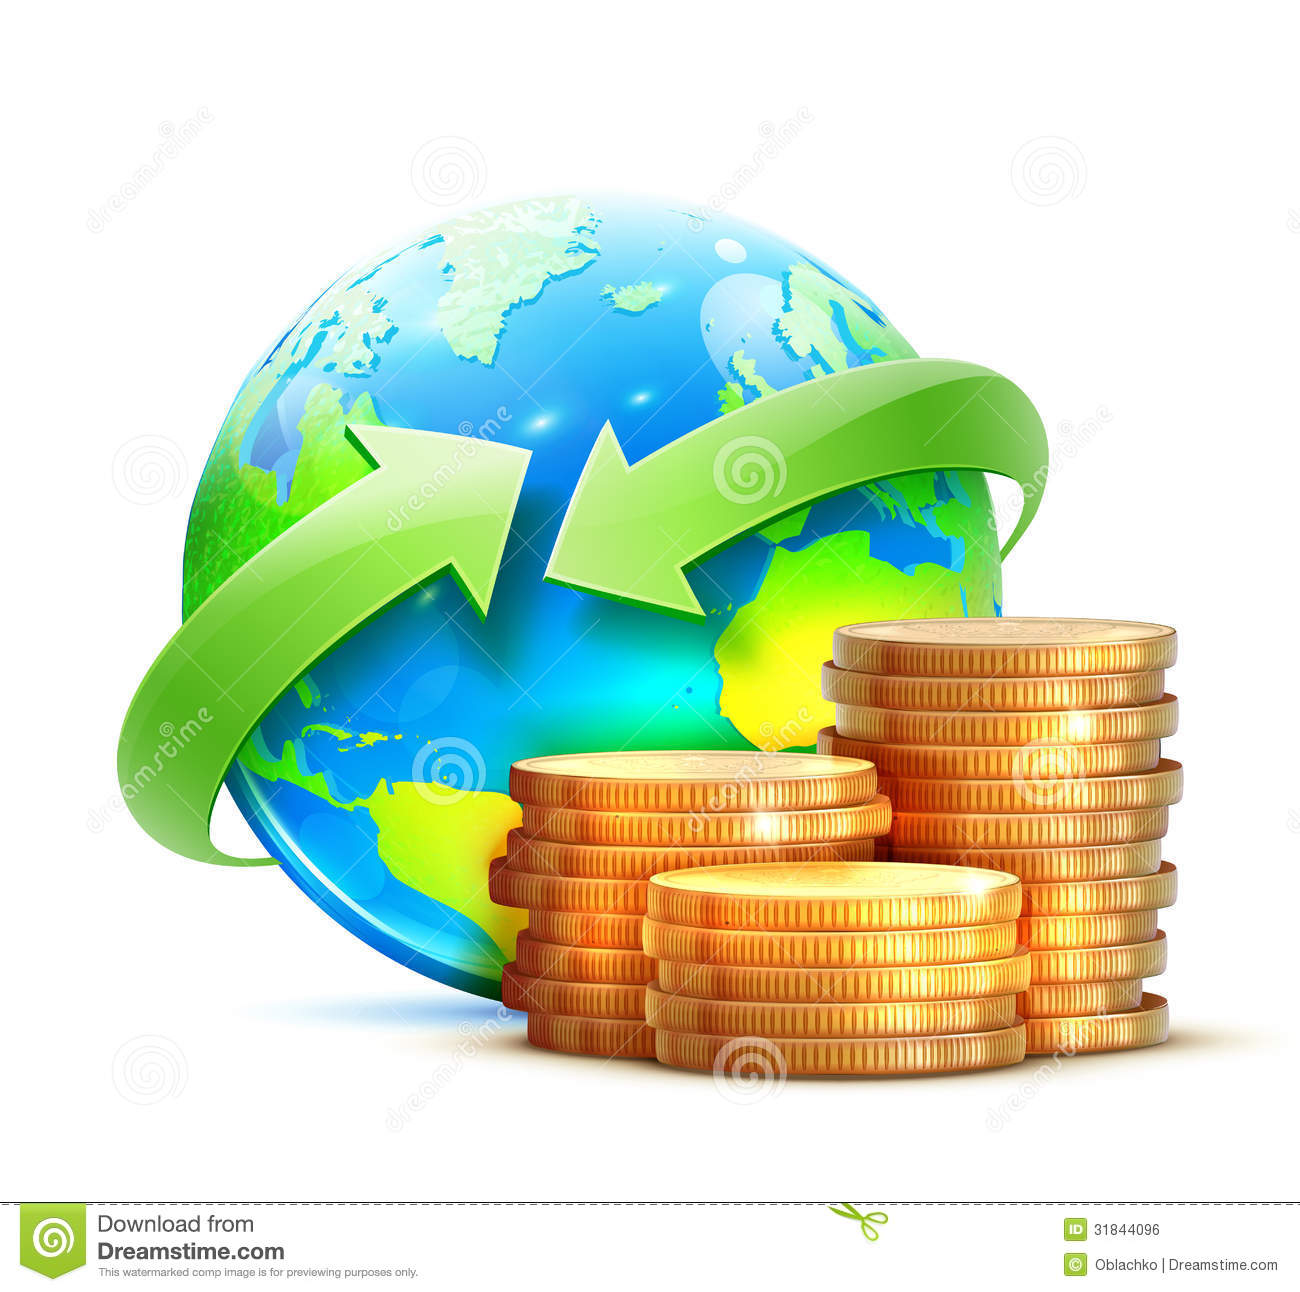 Vector Illustration Of Global Money Transfer Concept With Blue Glossy